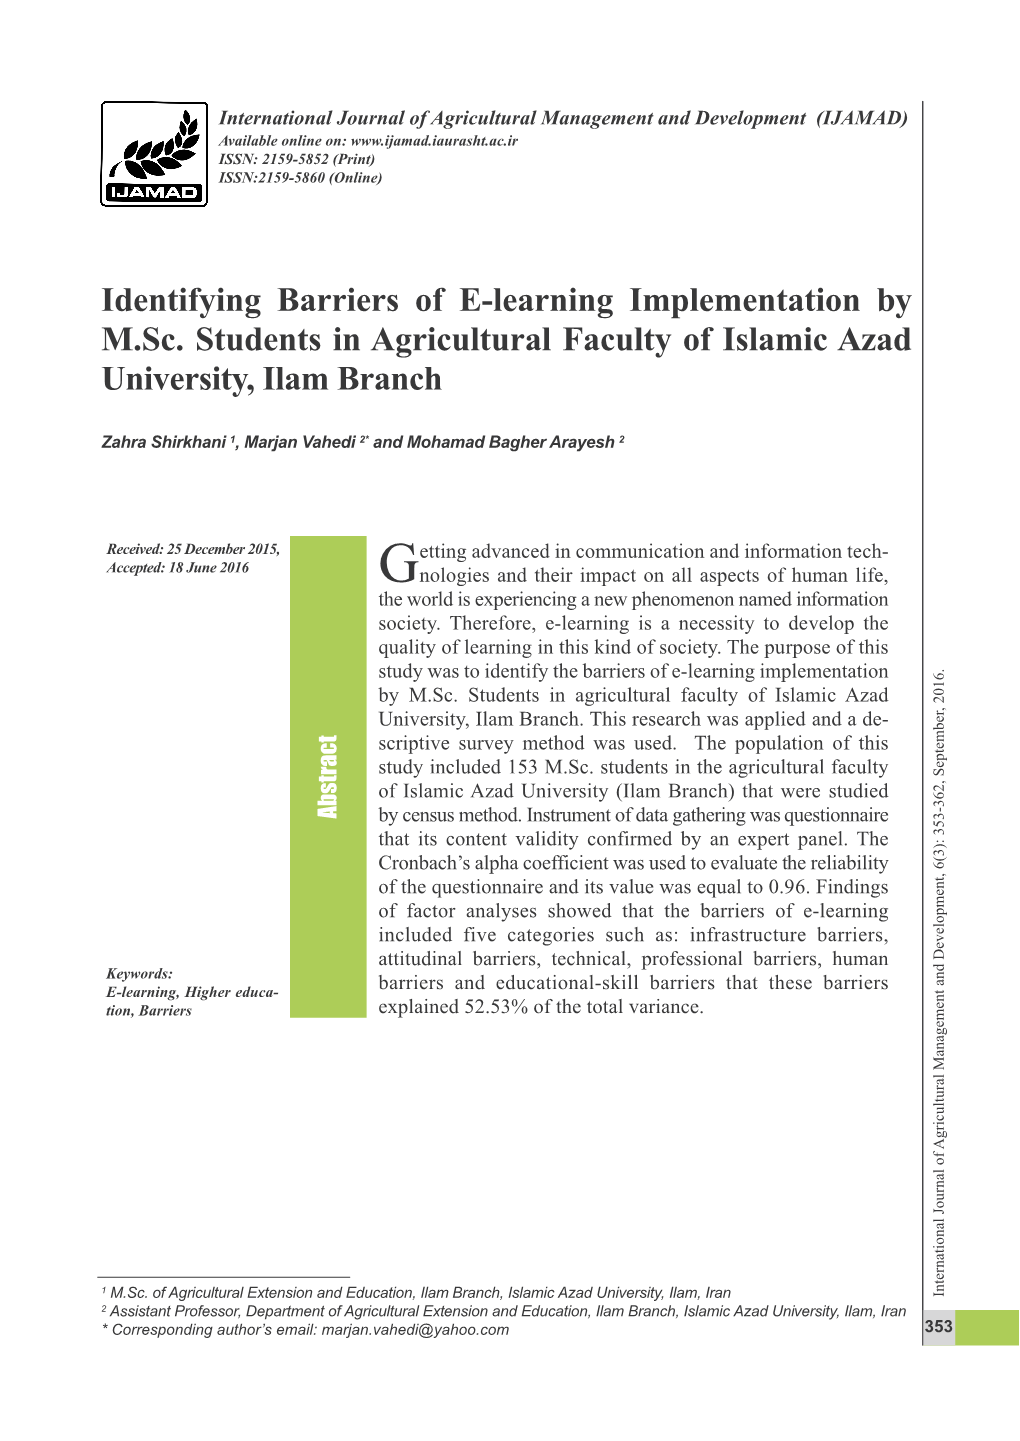 Identifying Barriers of E-Learning Implementation by M.Sc. Students